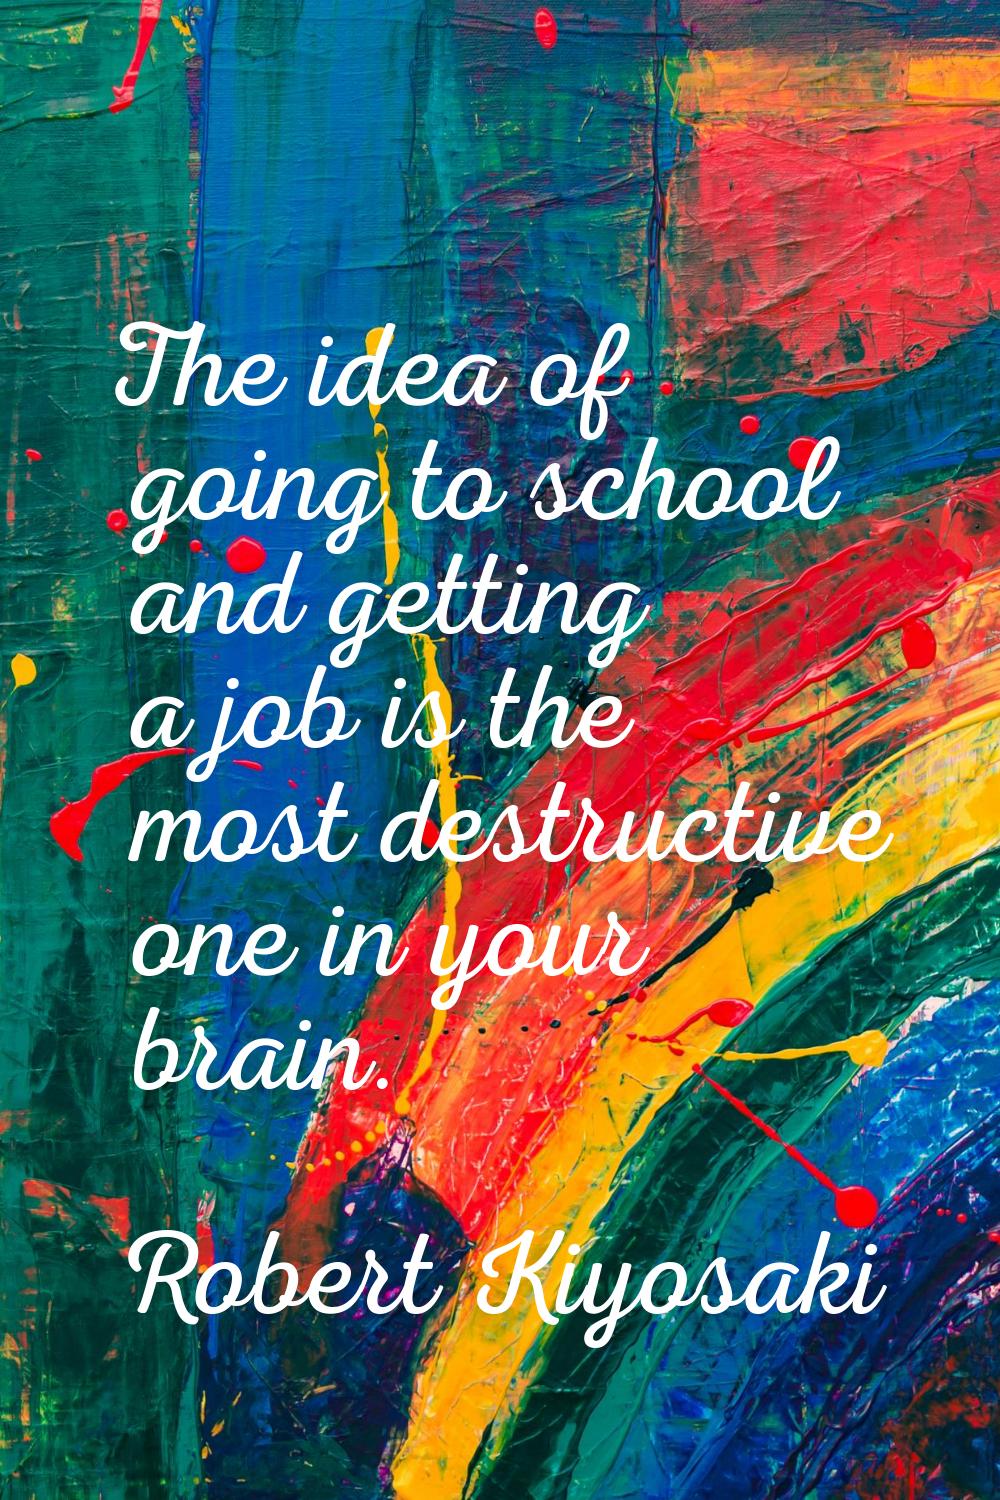 The idea of going to school and getting a job is the most destructive one in your brain.